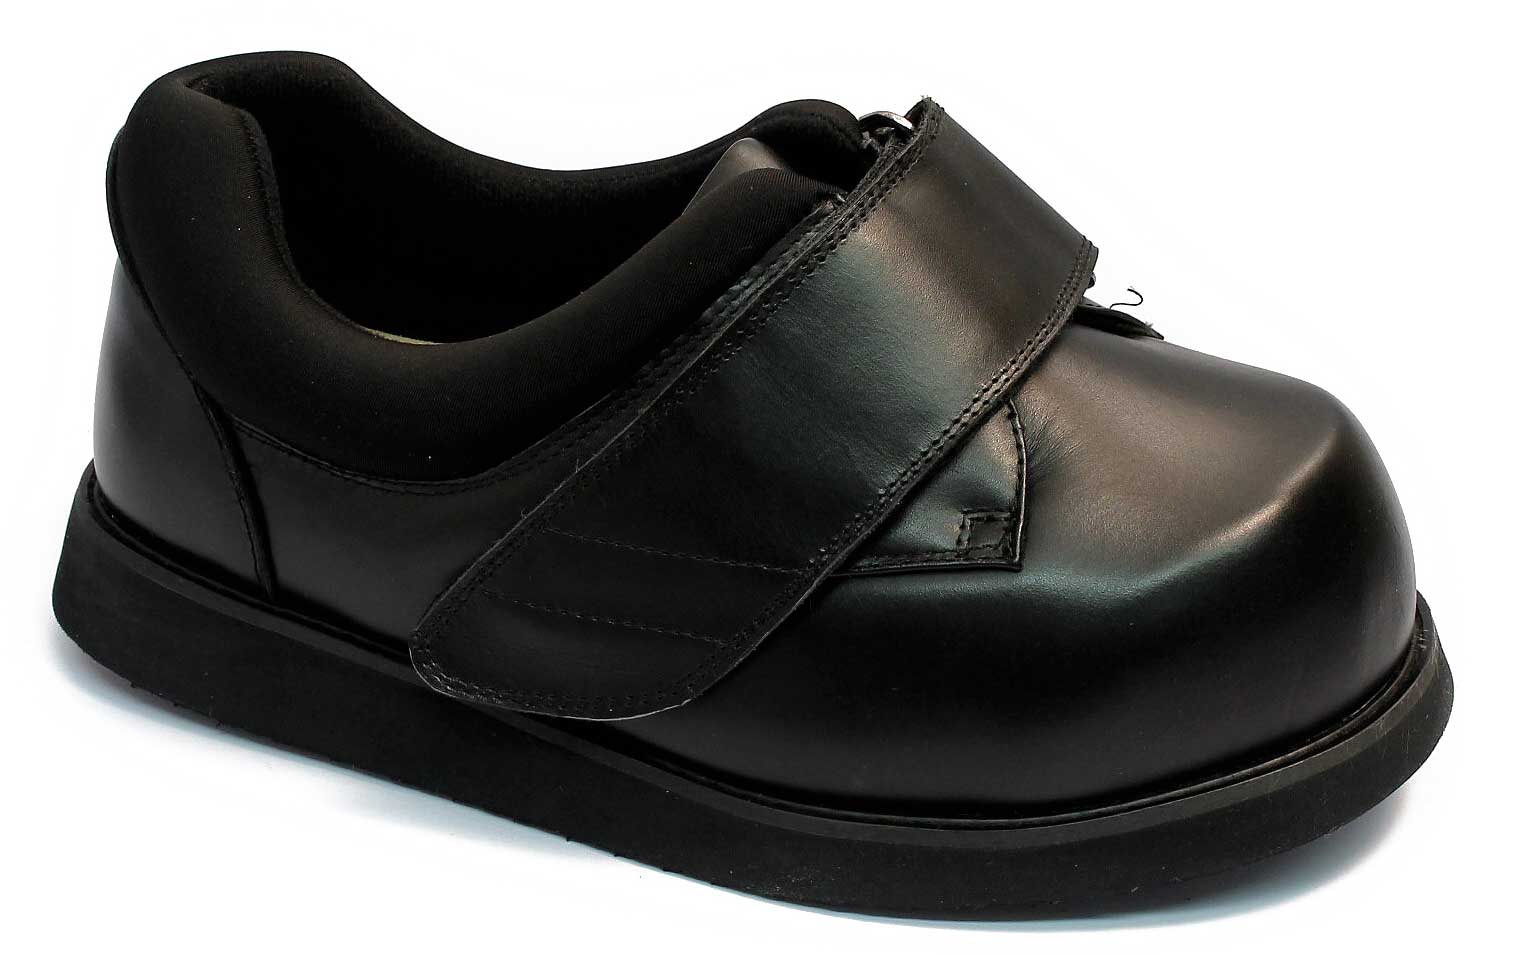 extra wide women's shoes for swollen feet